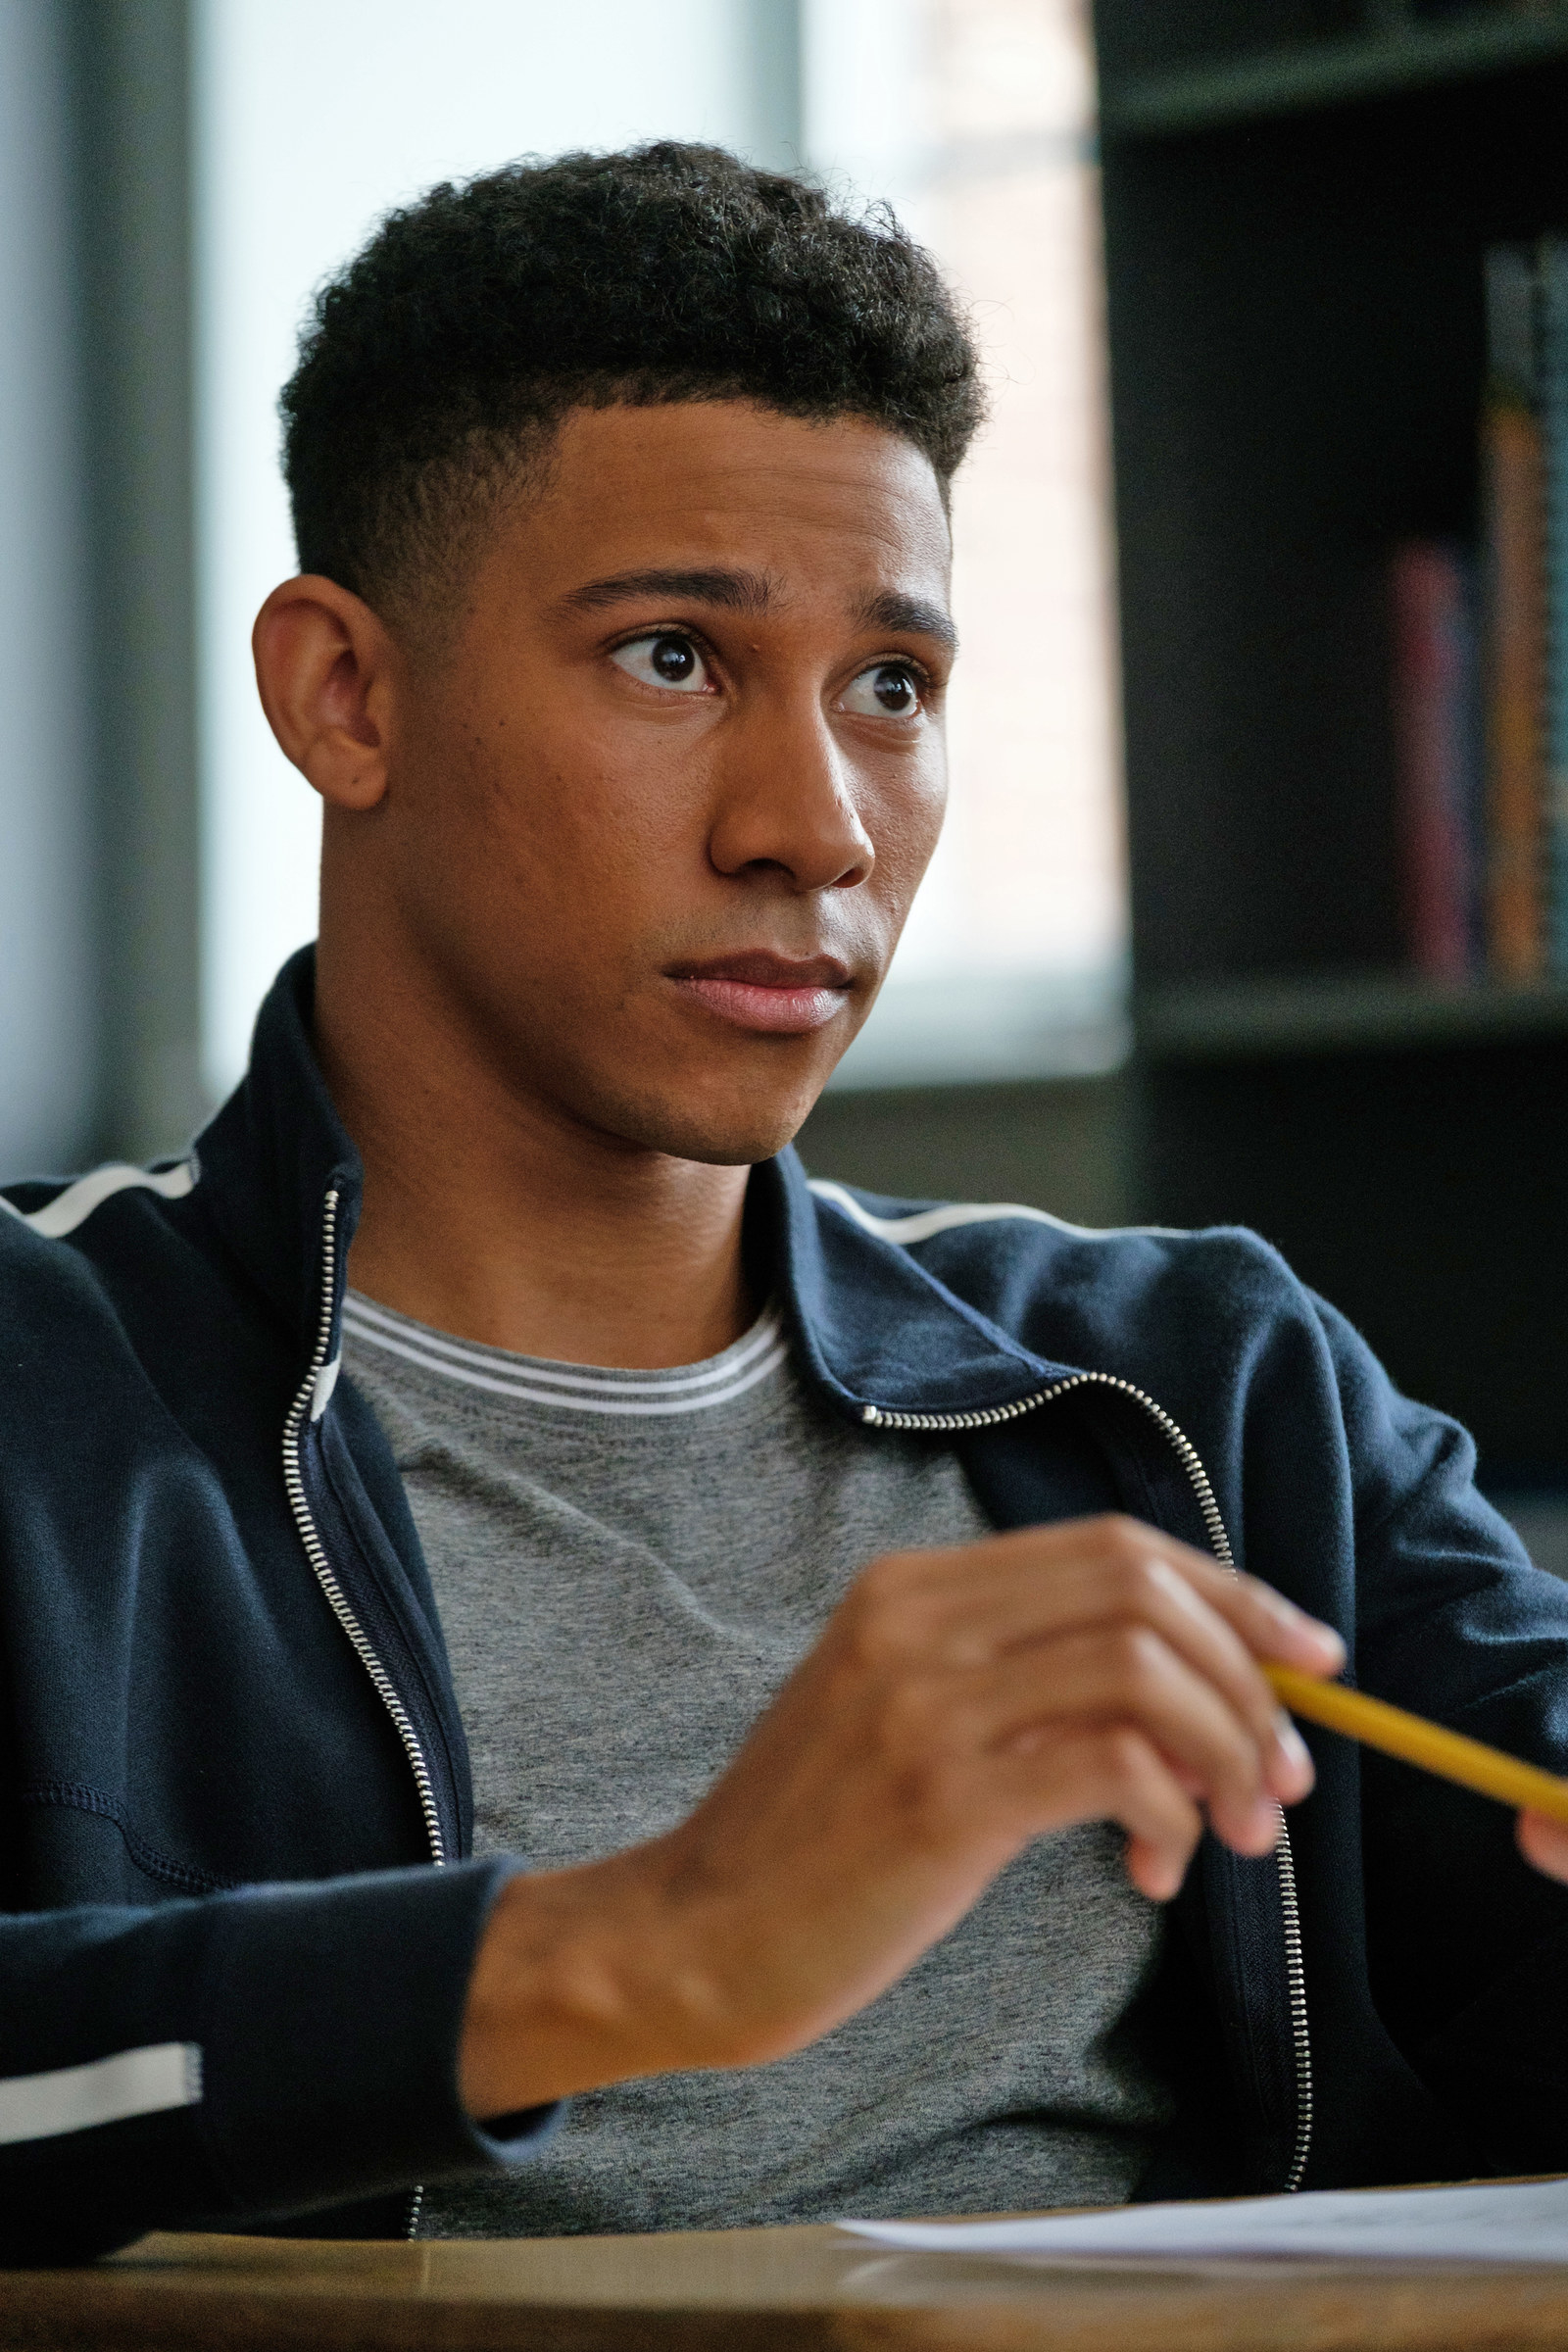 The Queer Actor At The Heart Of "Love, Simon"